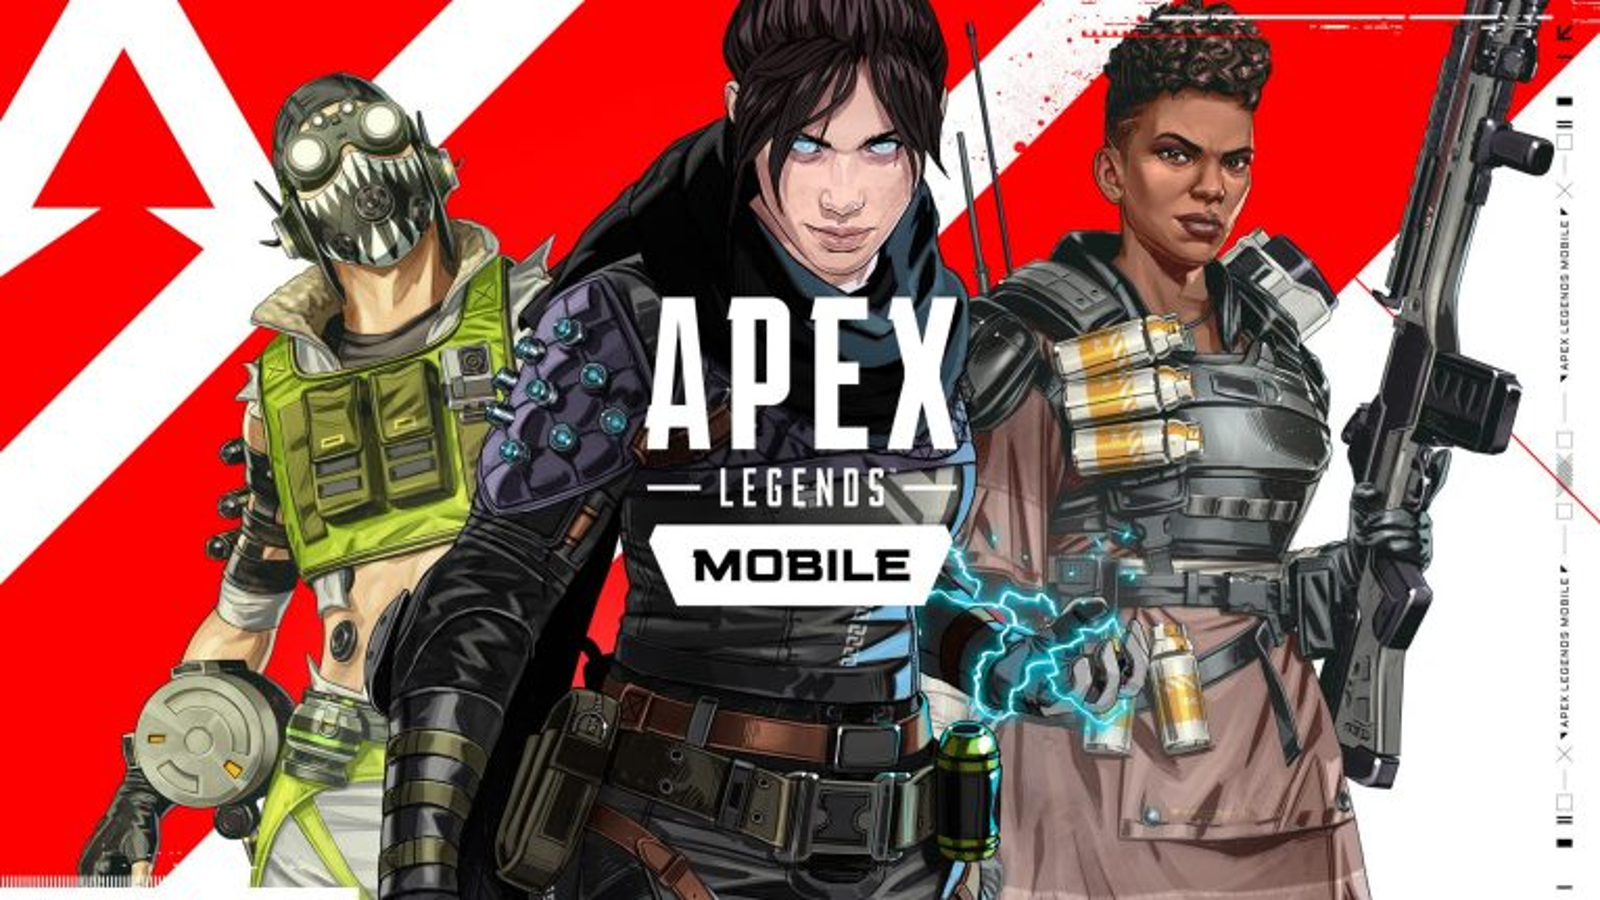 How to configure on-screen controls in Apex Legends Mobile